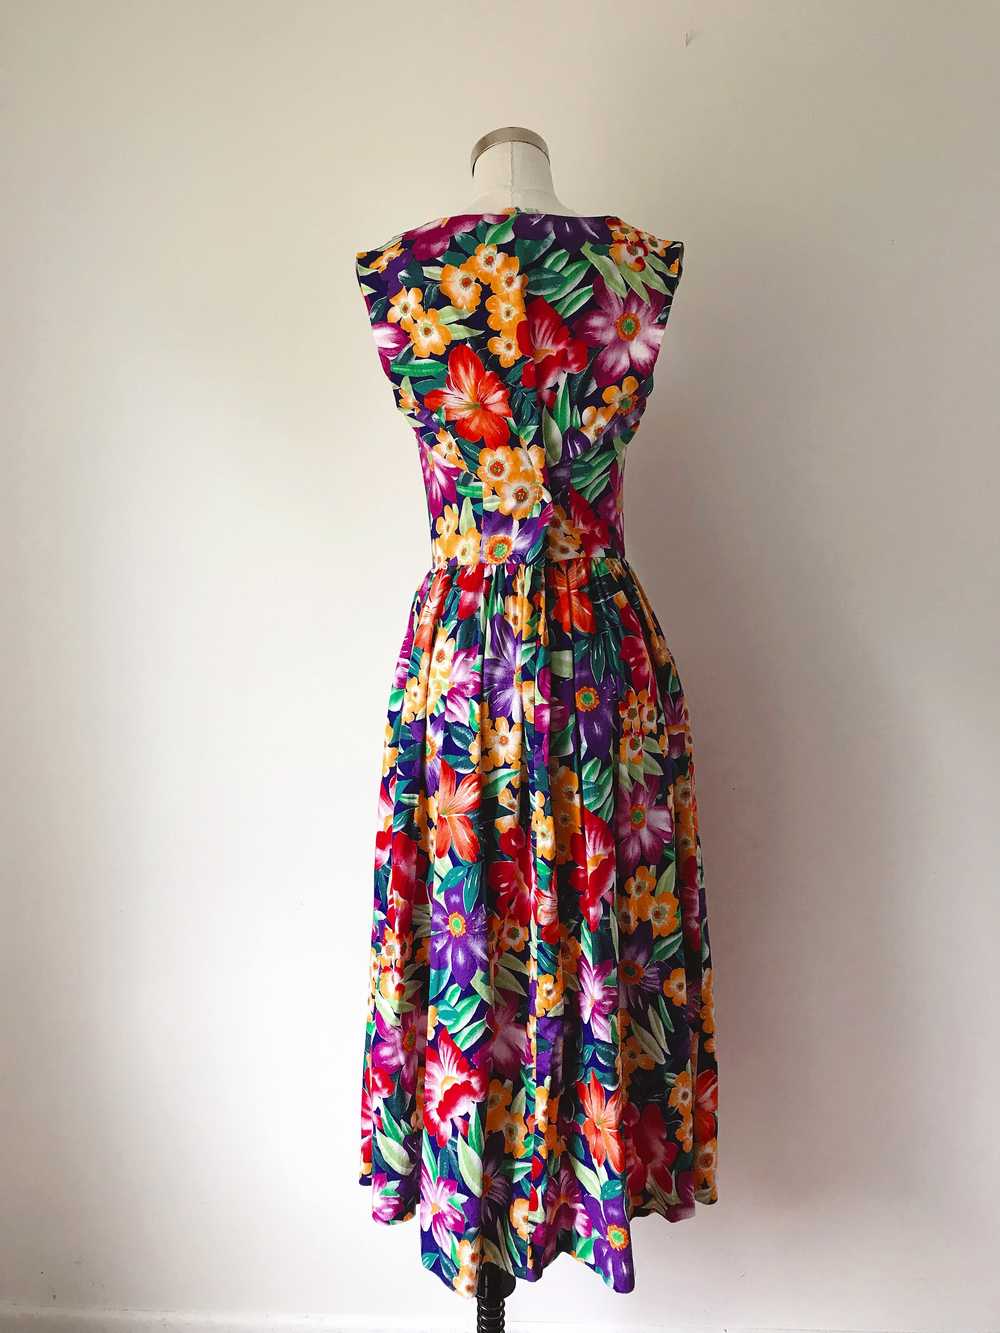 1990s Bright Floral Dress - image 5